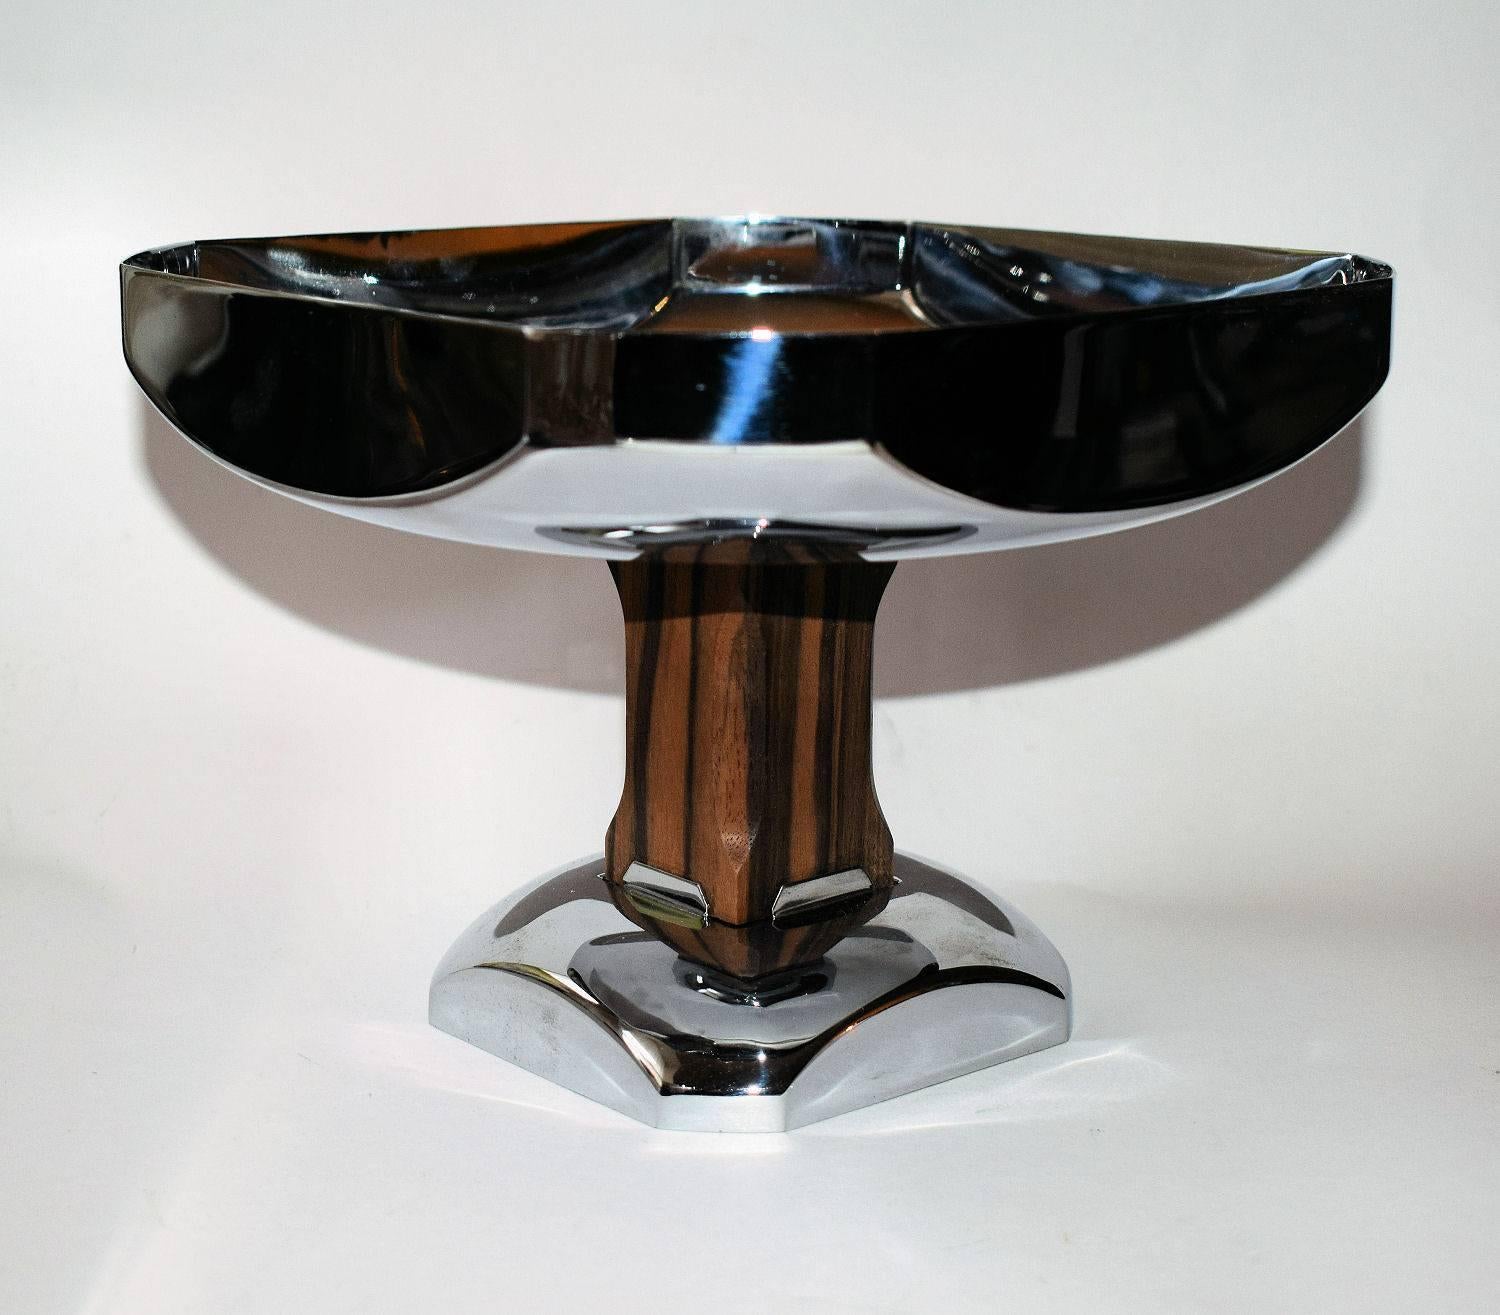 20th Century Art Deco Modernist Comport, 1930s, French